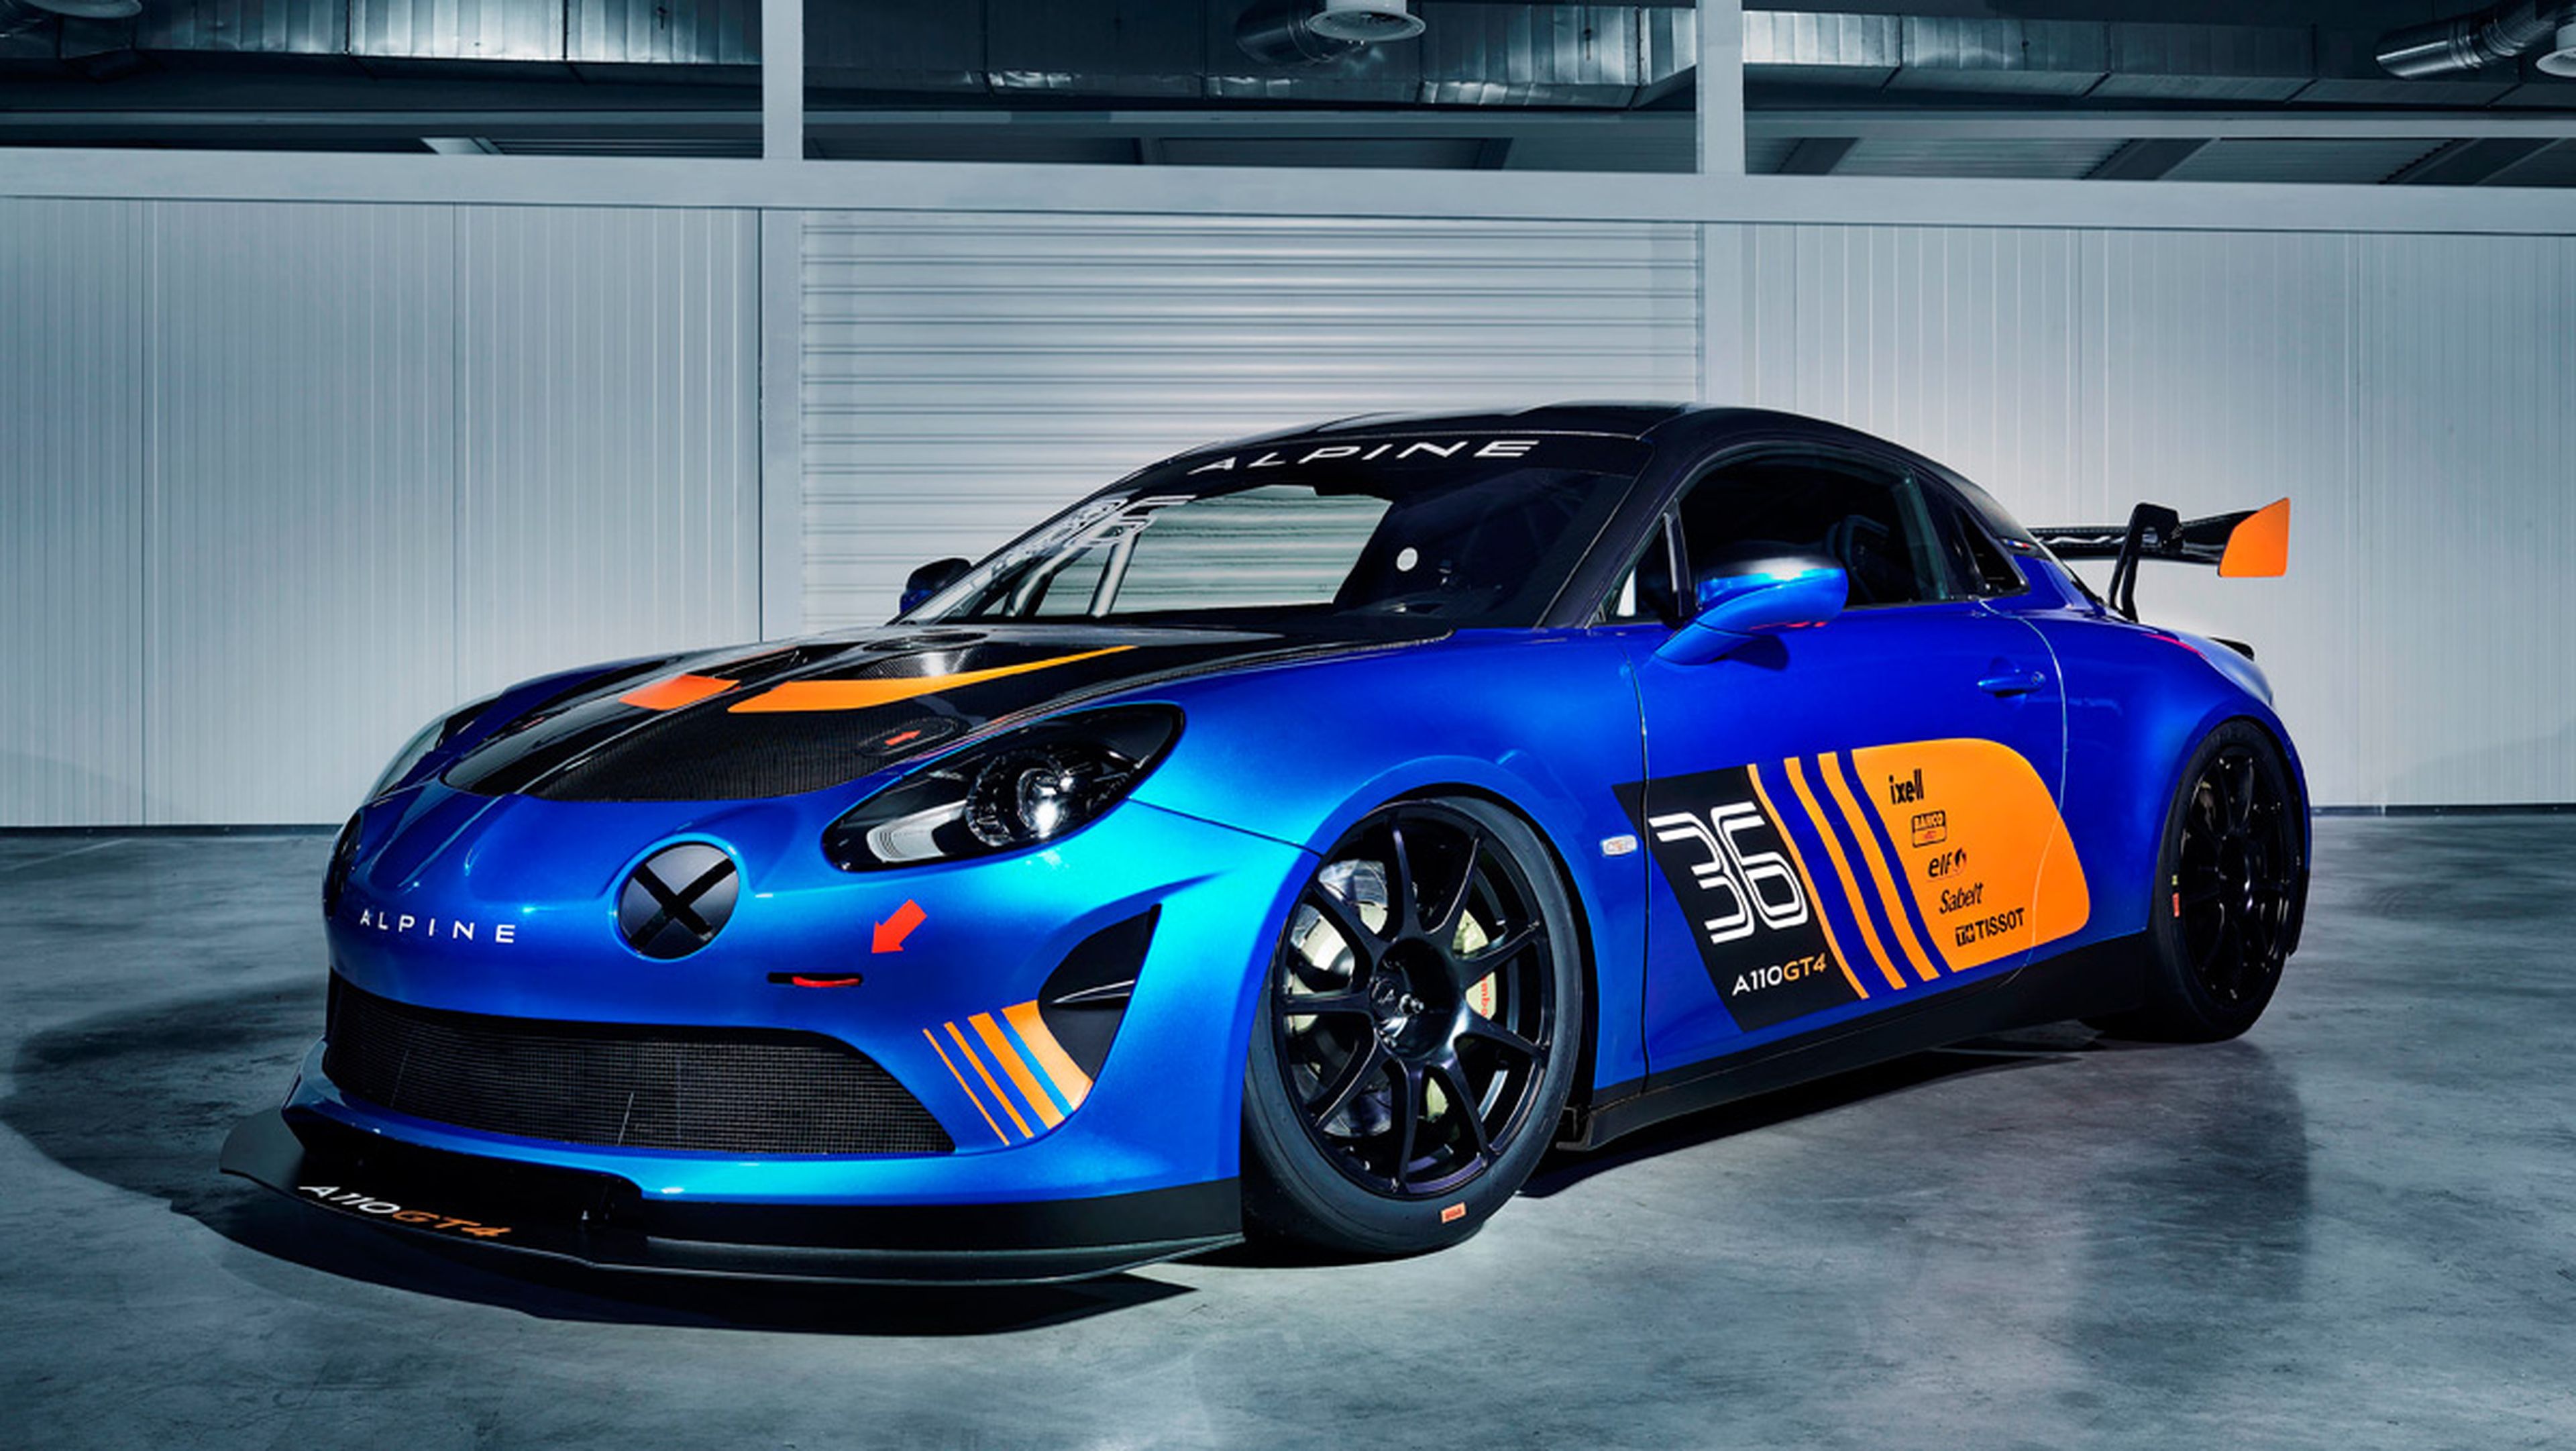 Alpine A110 GT4 (lateral)